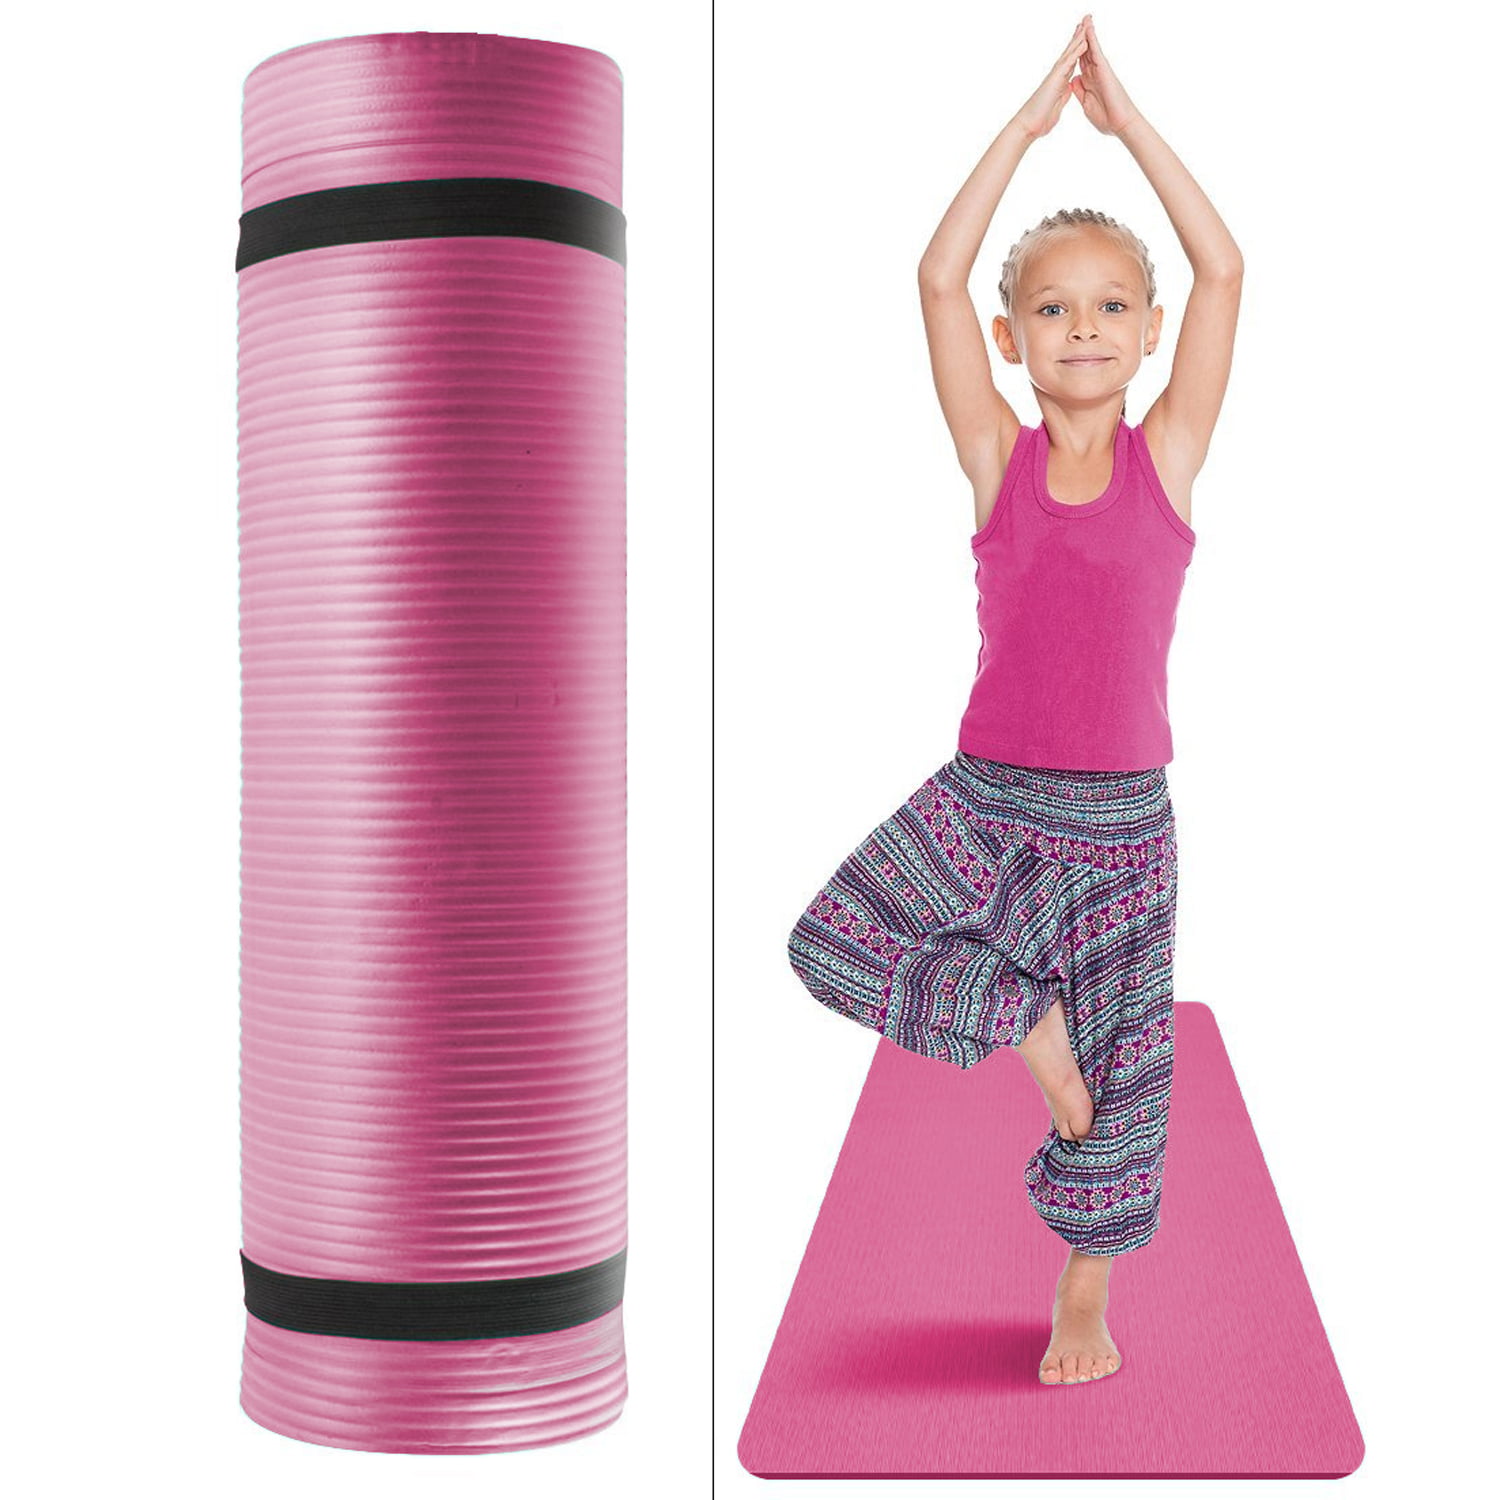 Reversible Yoga Mat w/ 2-in-1 Strap Only $9.99 Shipped on Costco